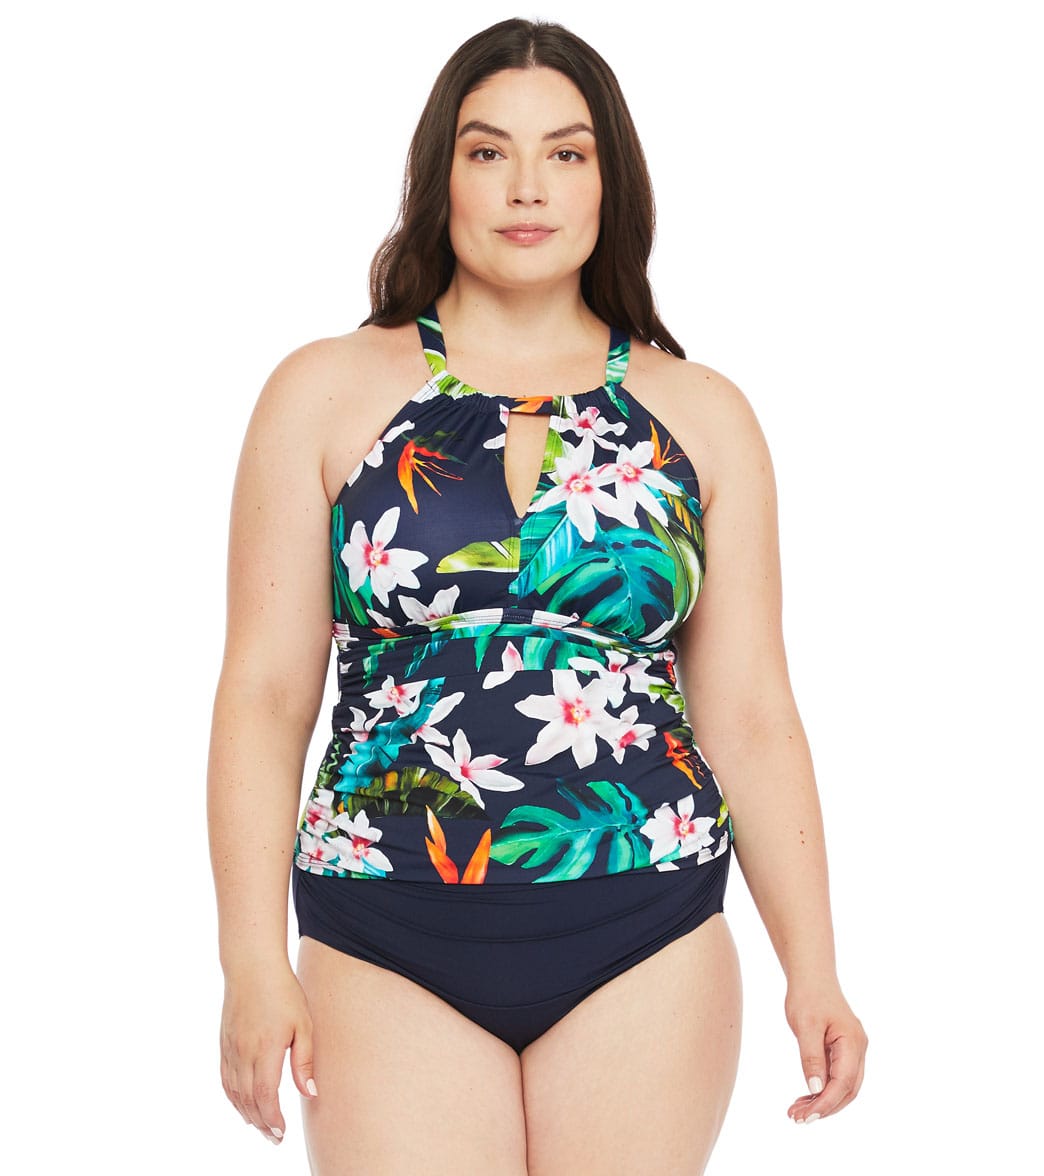 Ralph Lauren Plus Size Watercolor Tropical High Neck Tankini Top At Swimoutlet Com Free Shipping Buy new plus size lauren ralph lauren dresses, jeans, sweaters & other clothing styles at macys.com. ralph lauren plus size watercolor tropical high neck tankini top